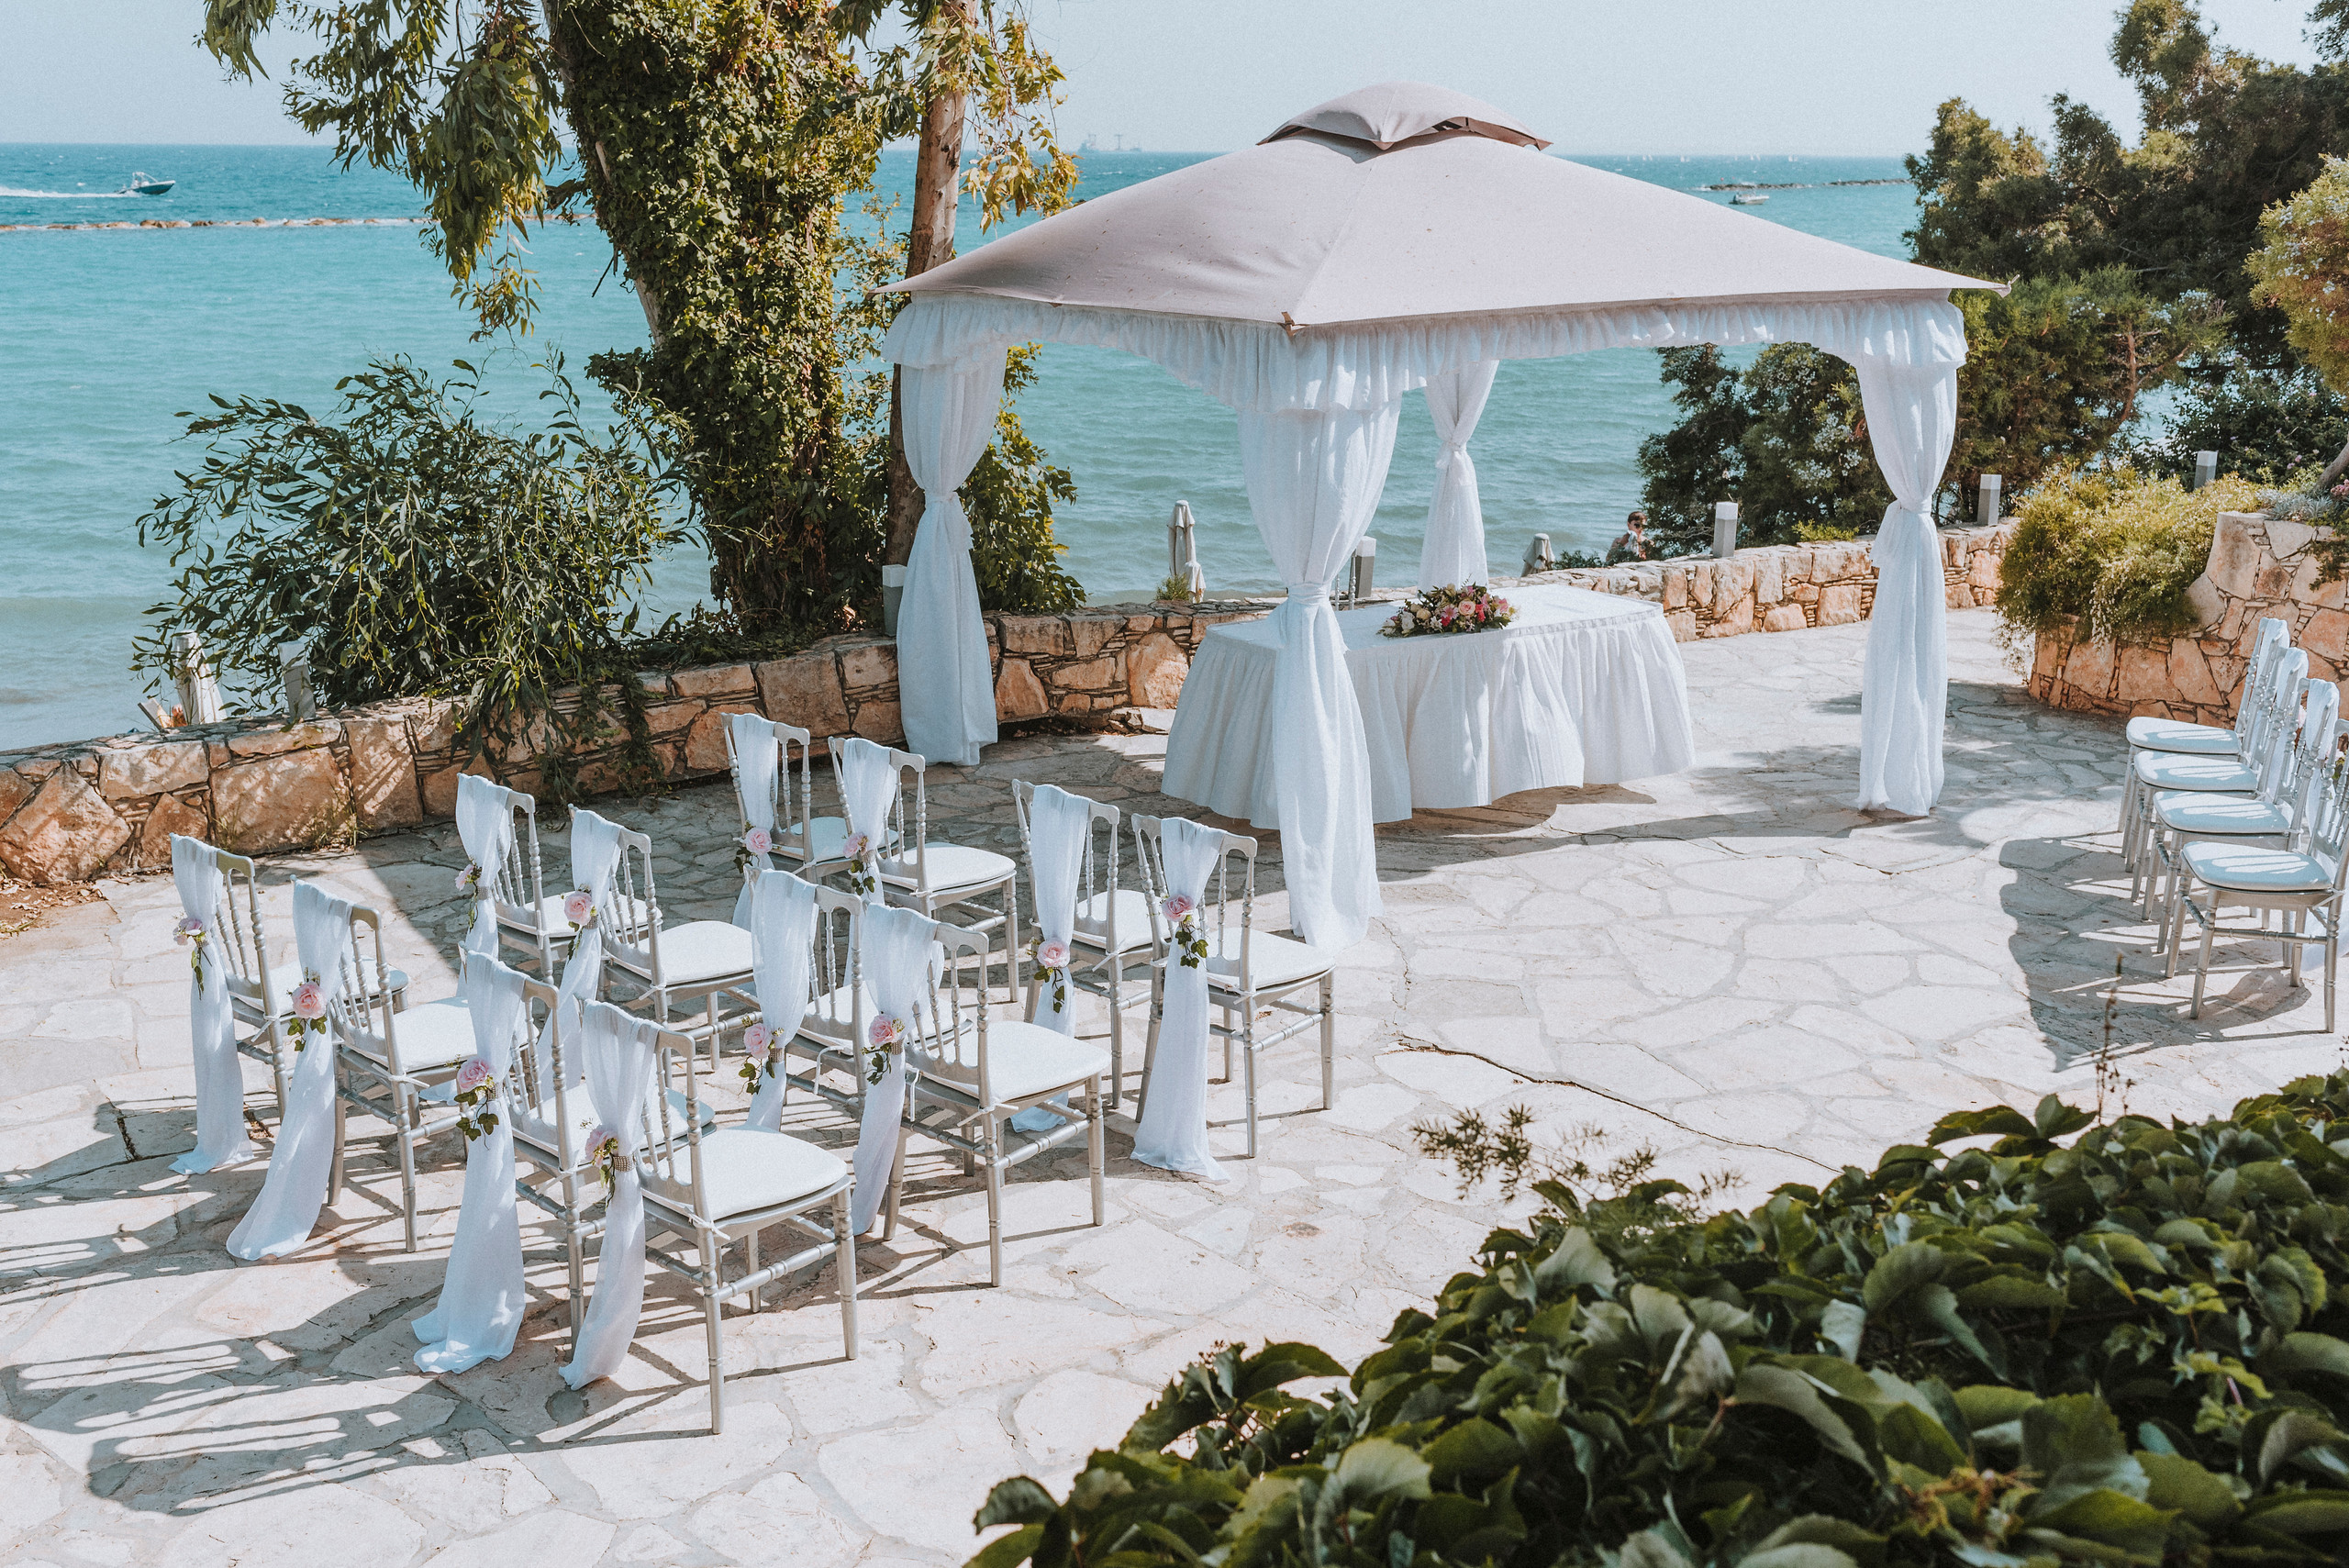 Book your wedding day in The Royal Apollonia Limassol